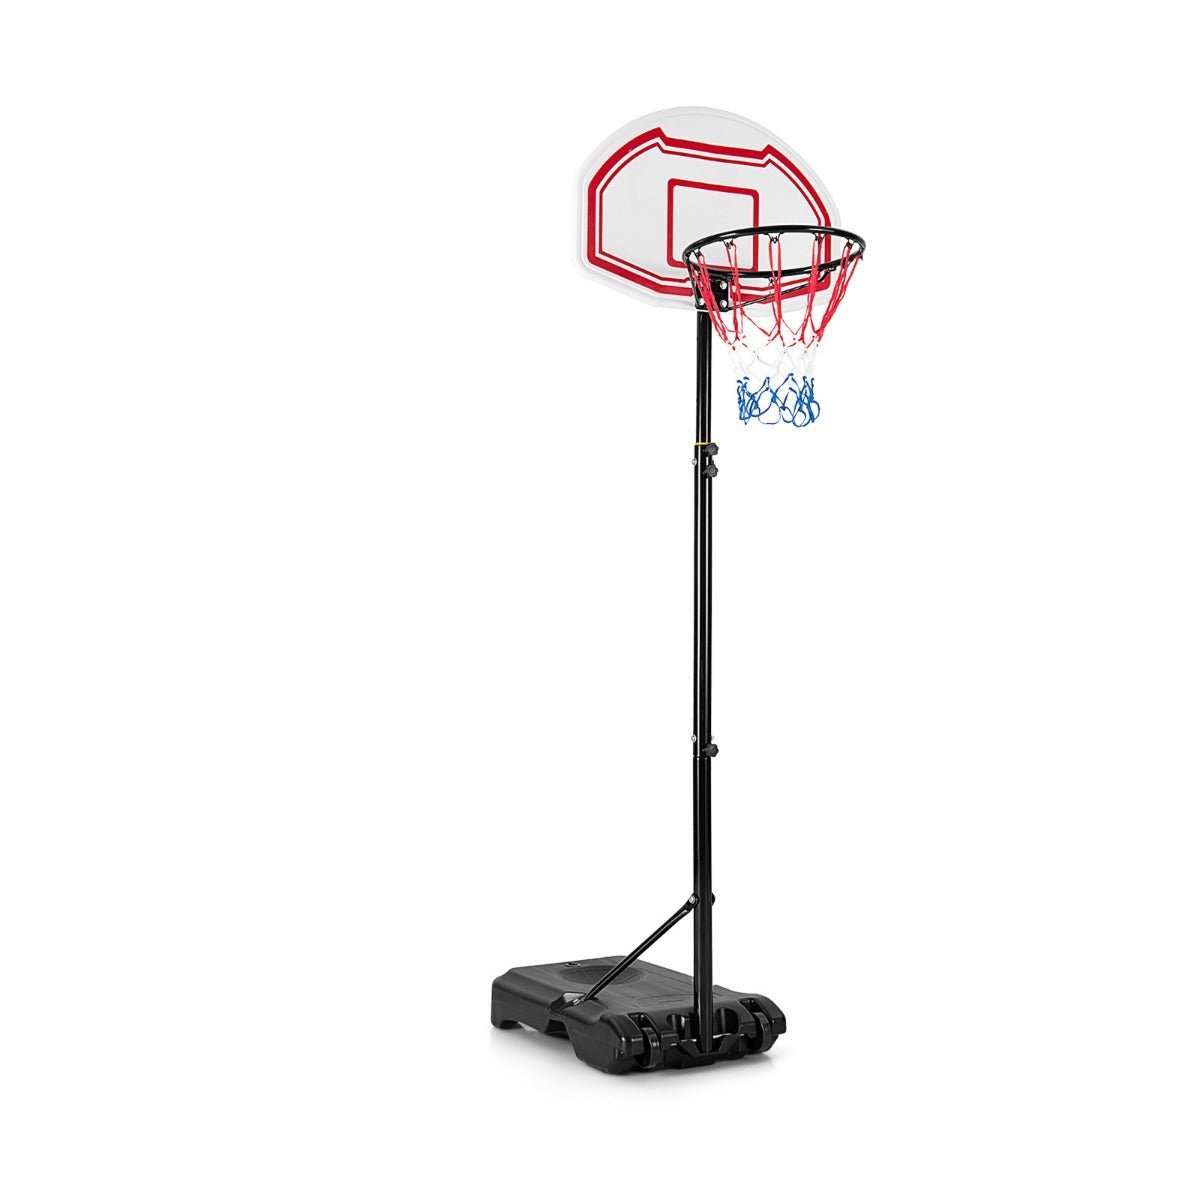 Shoot Hoops Like a Pro - Buy Yours Today!